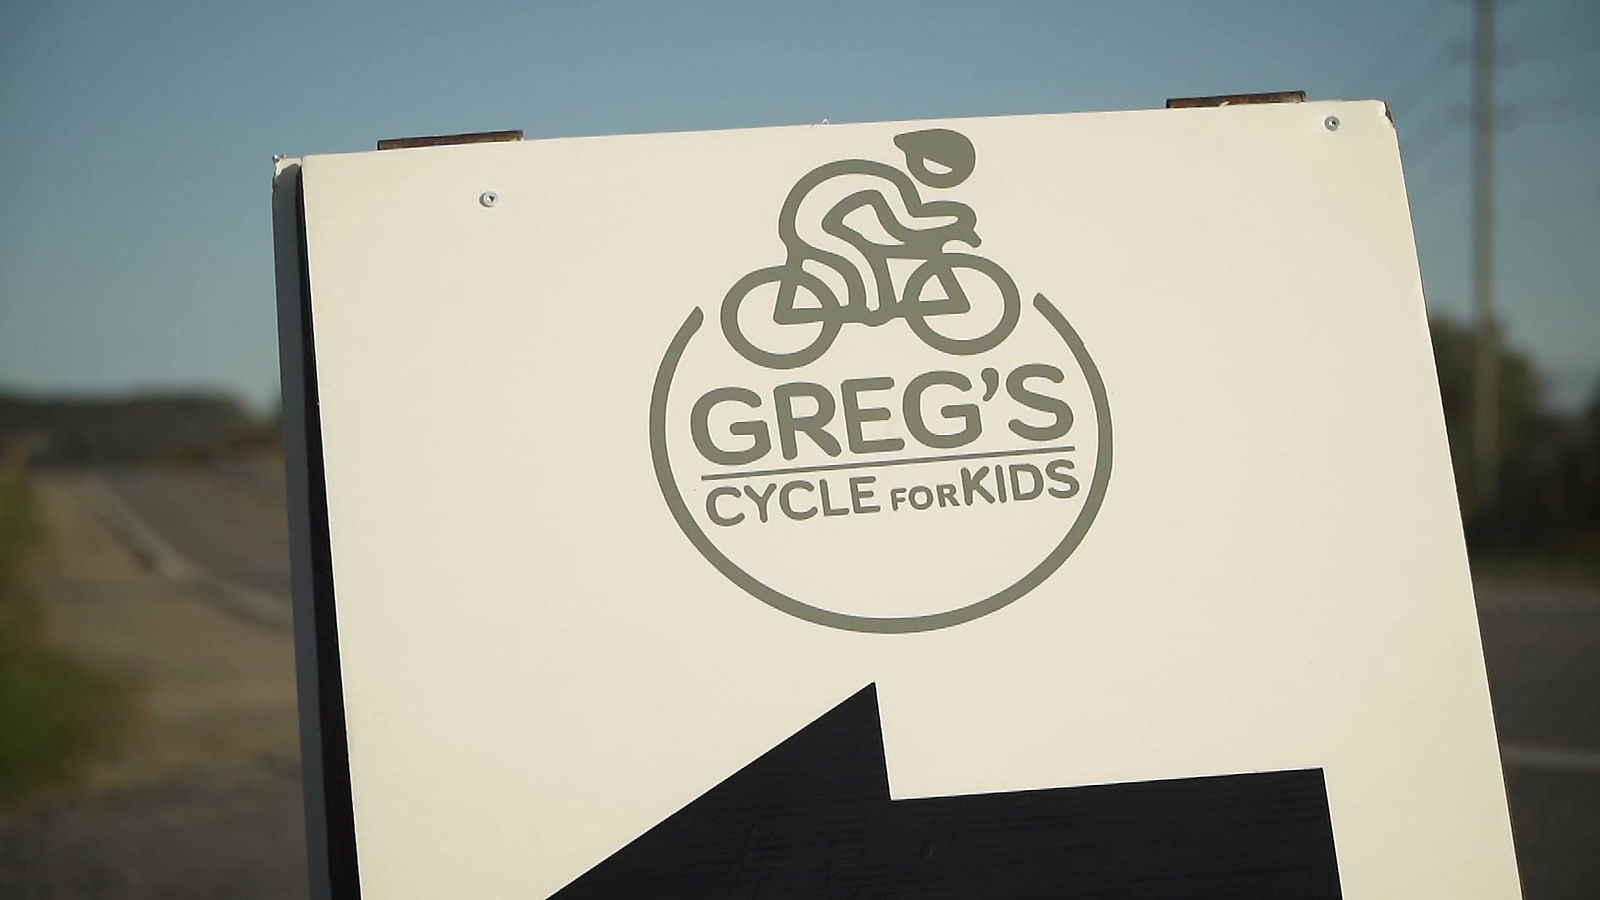 Greg's Cycle for Kids